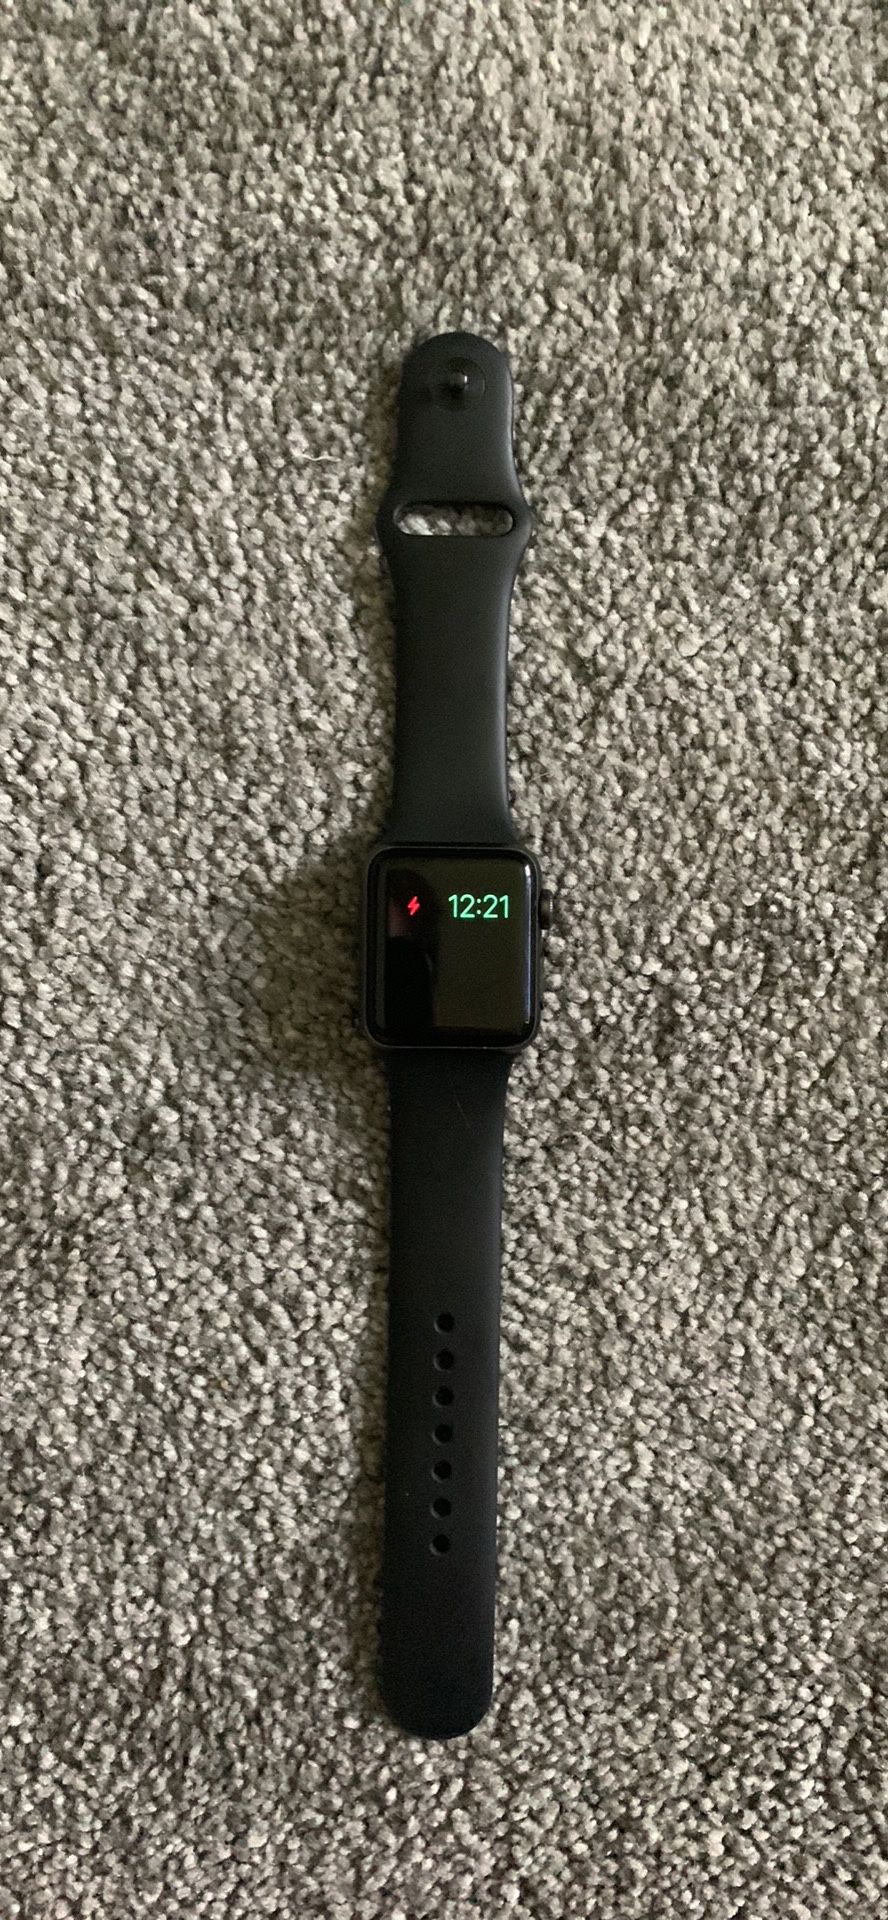 Apple Watch Series 3 With Charger (GPS 38mm)